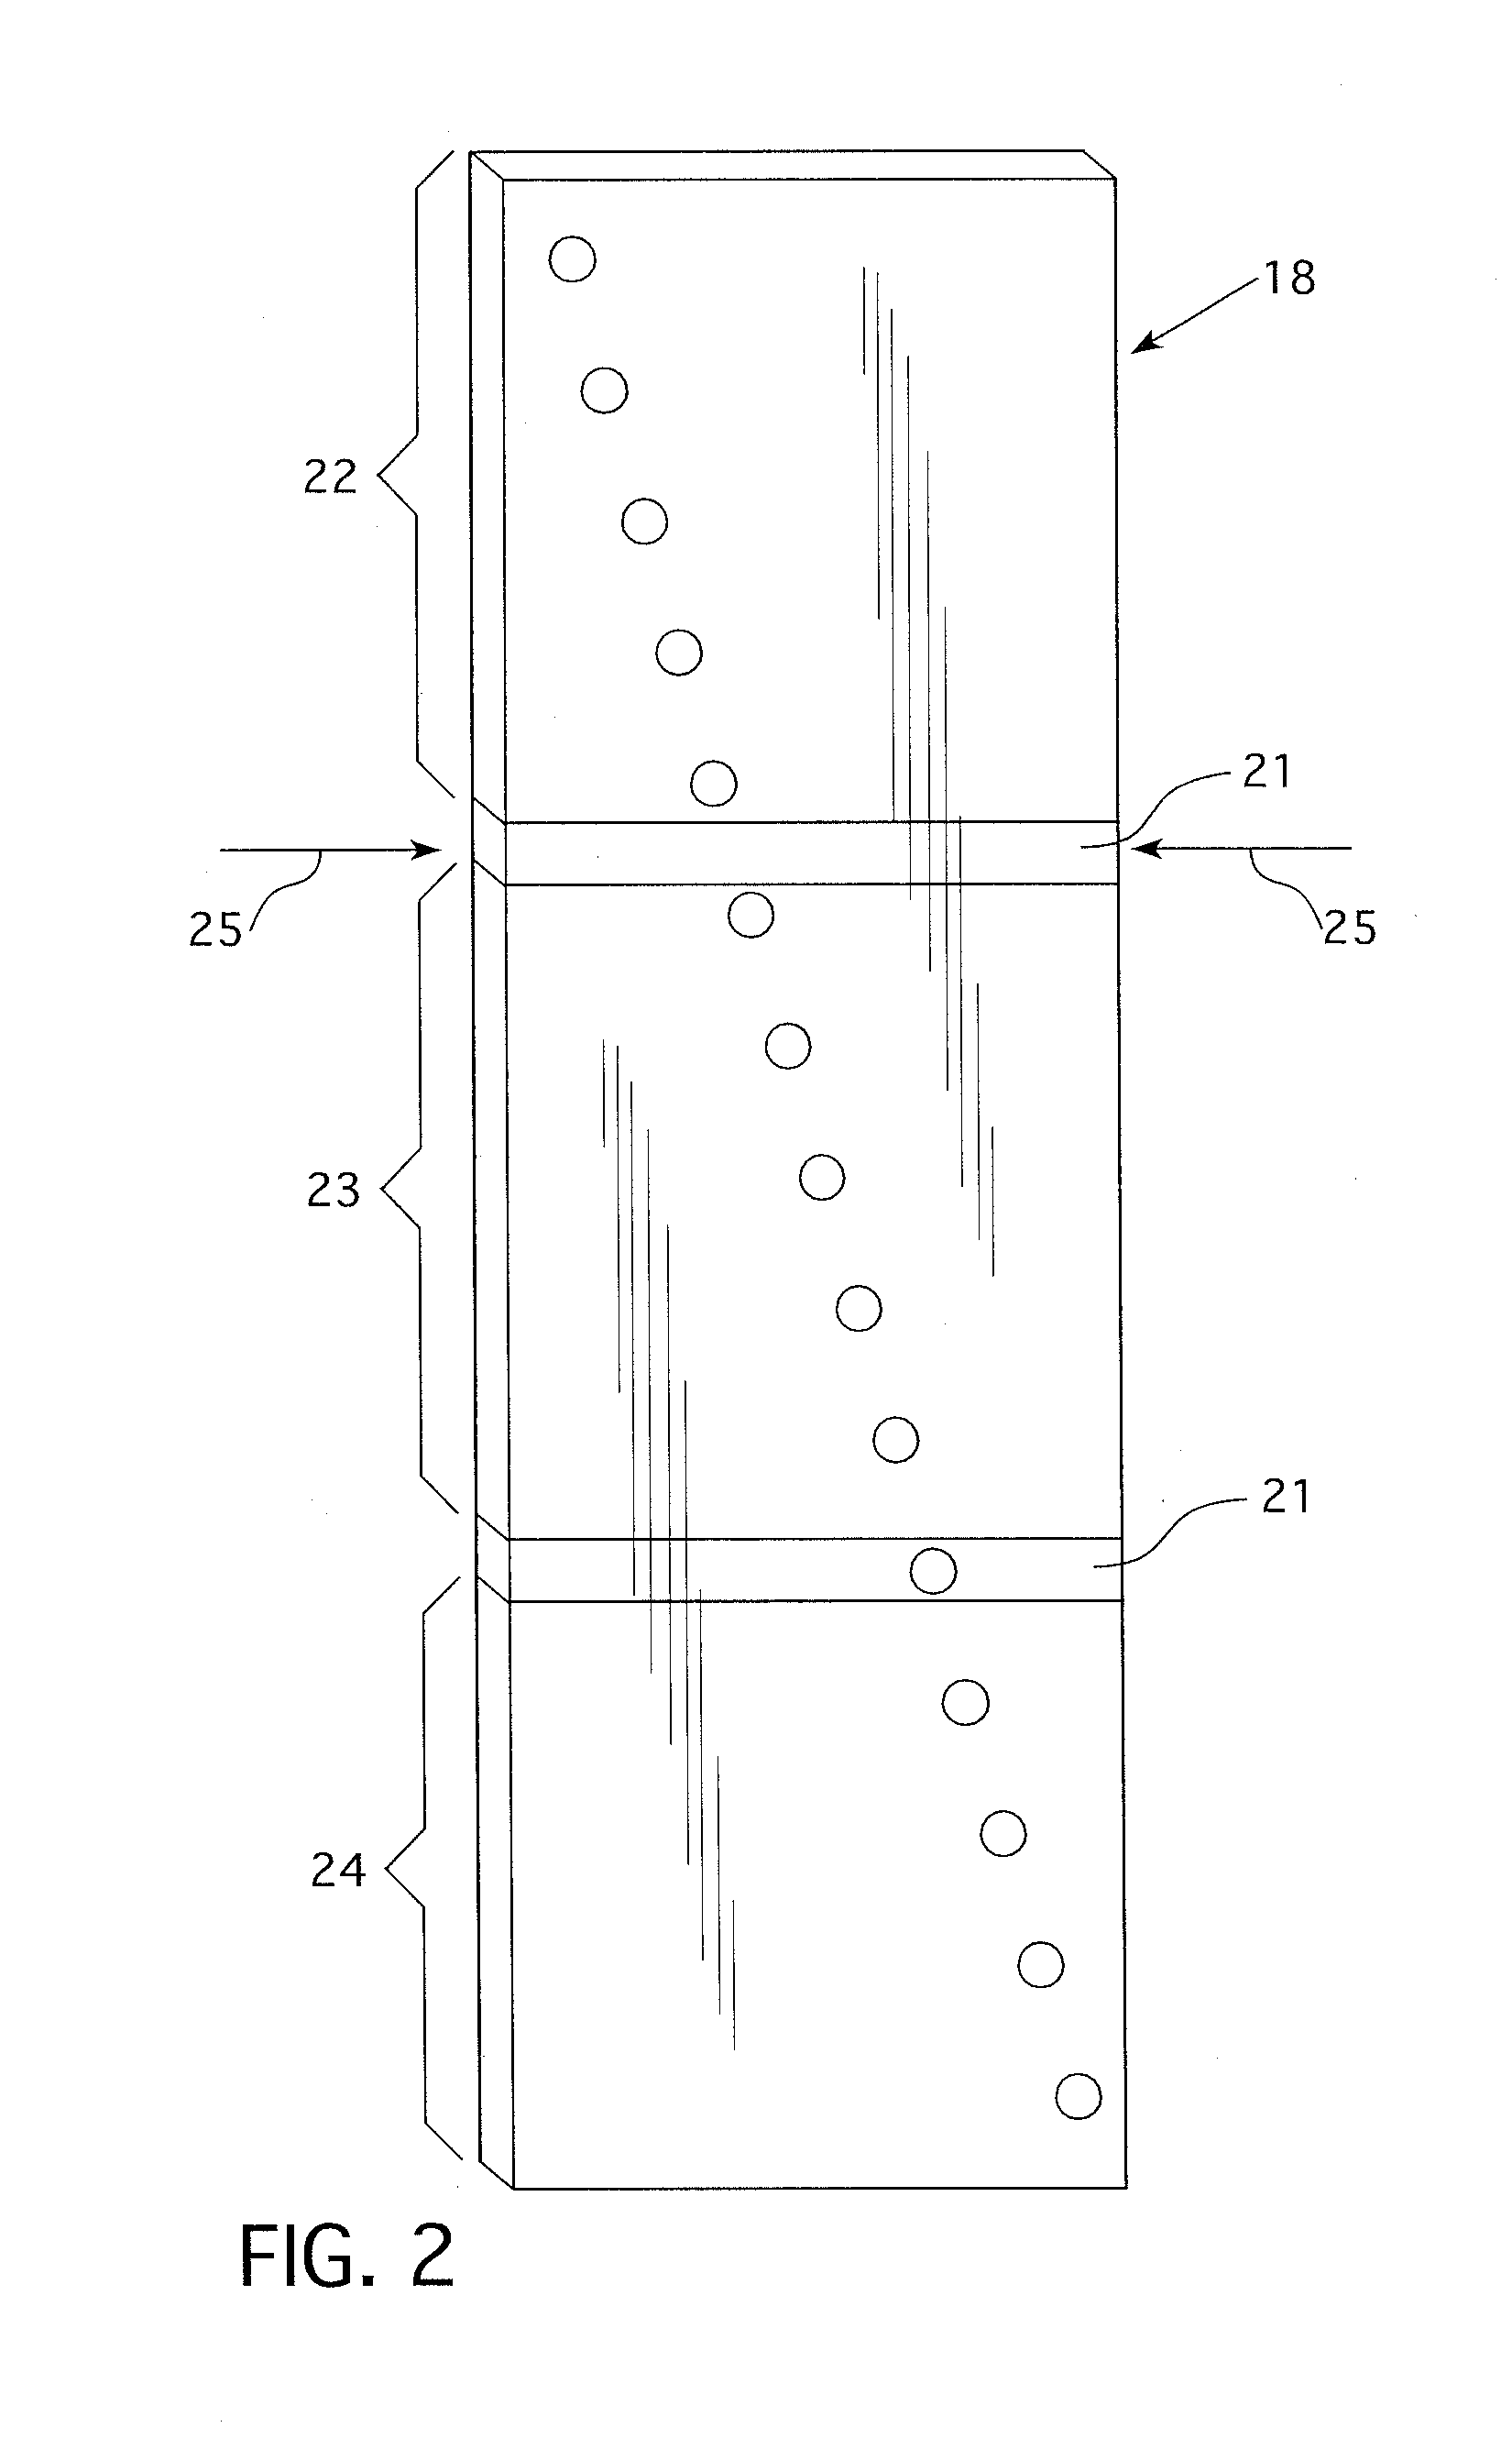 Method of segmenting irradiated boiling water reactor control rod blades